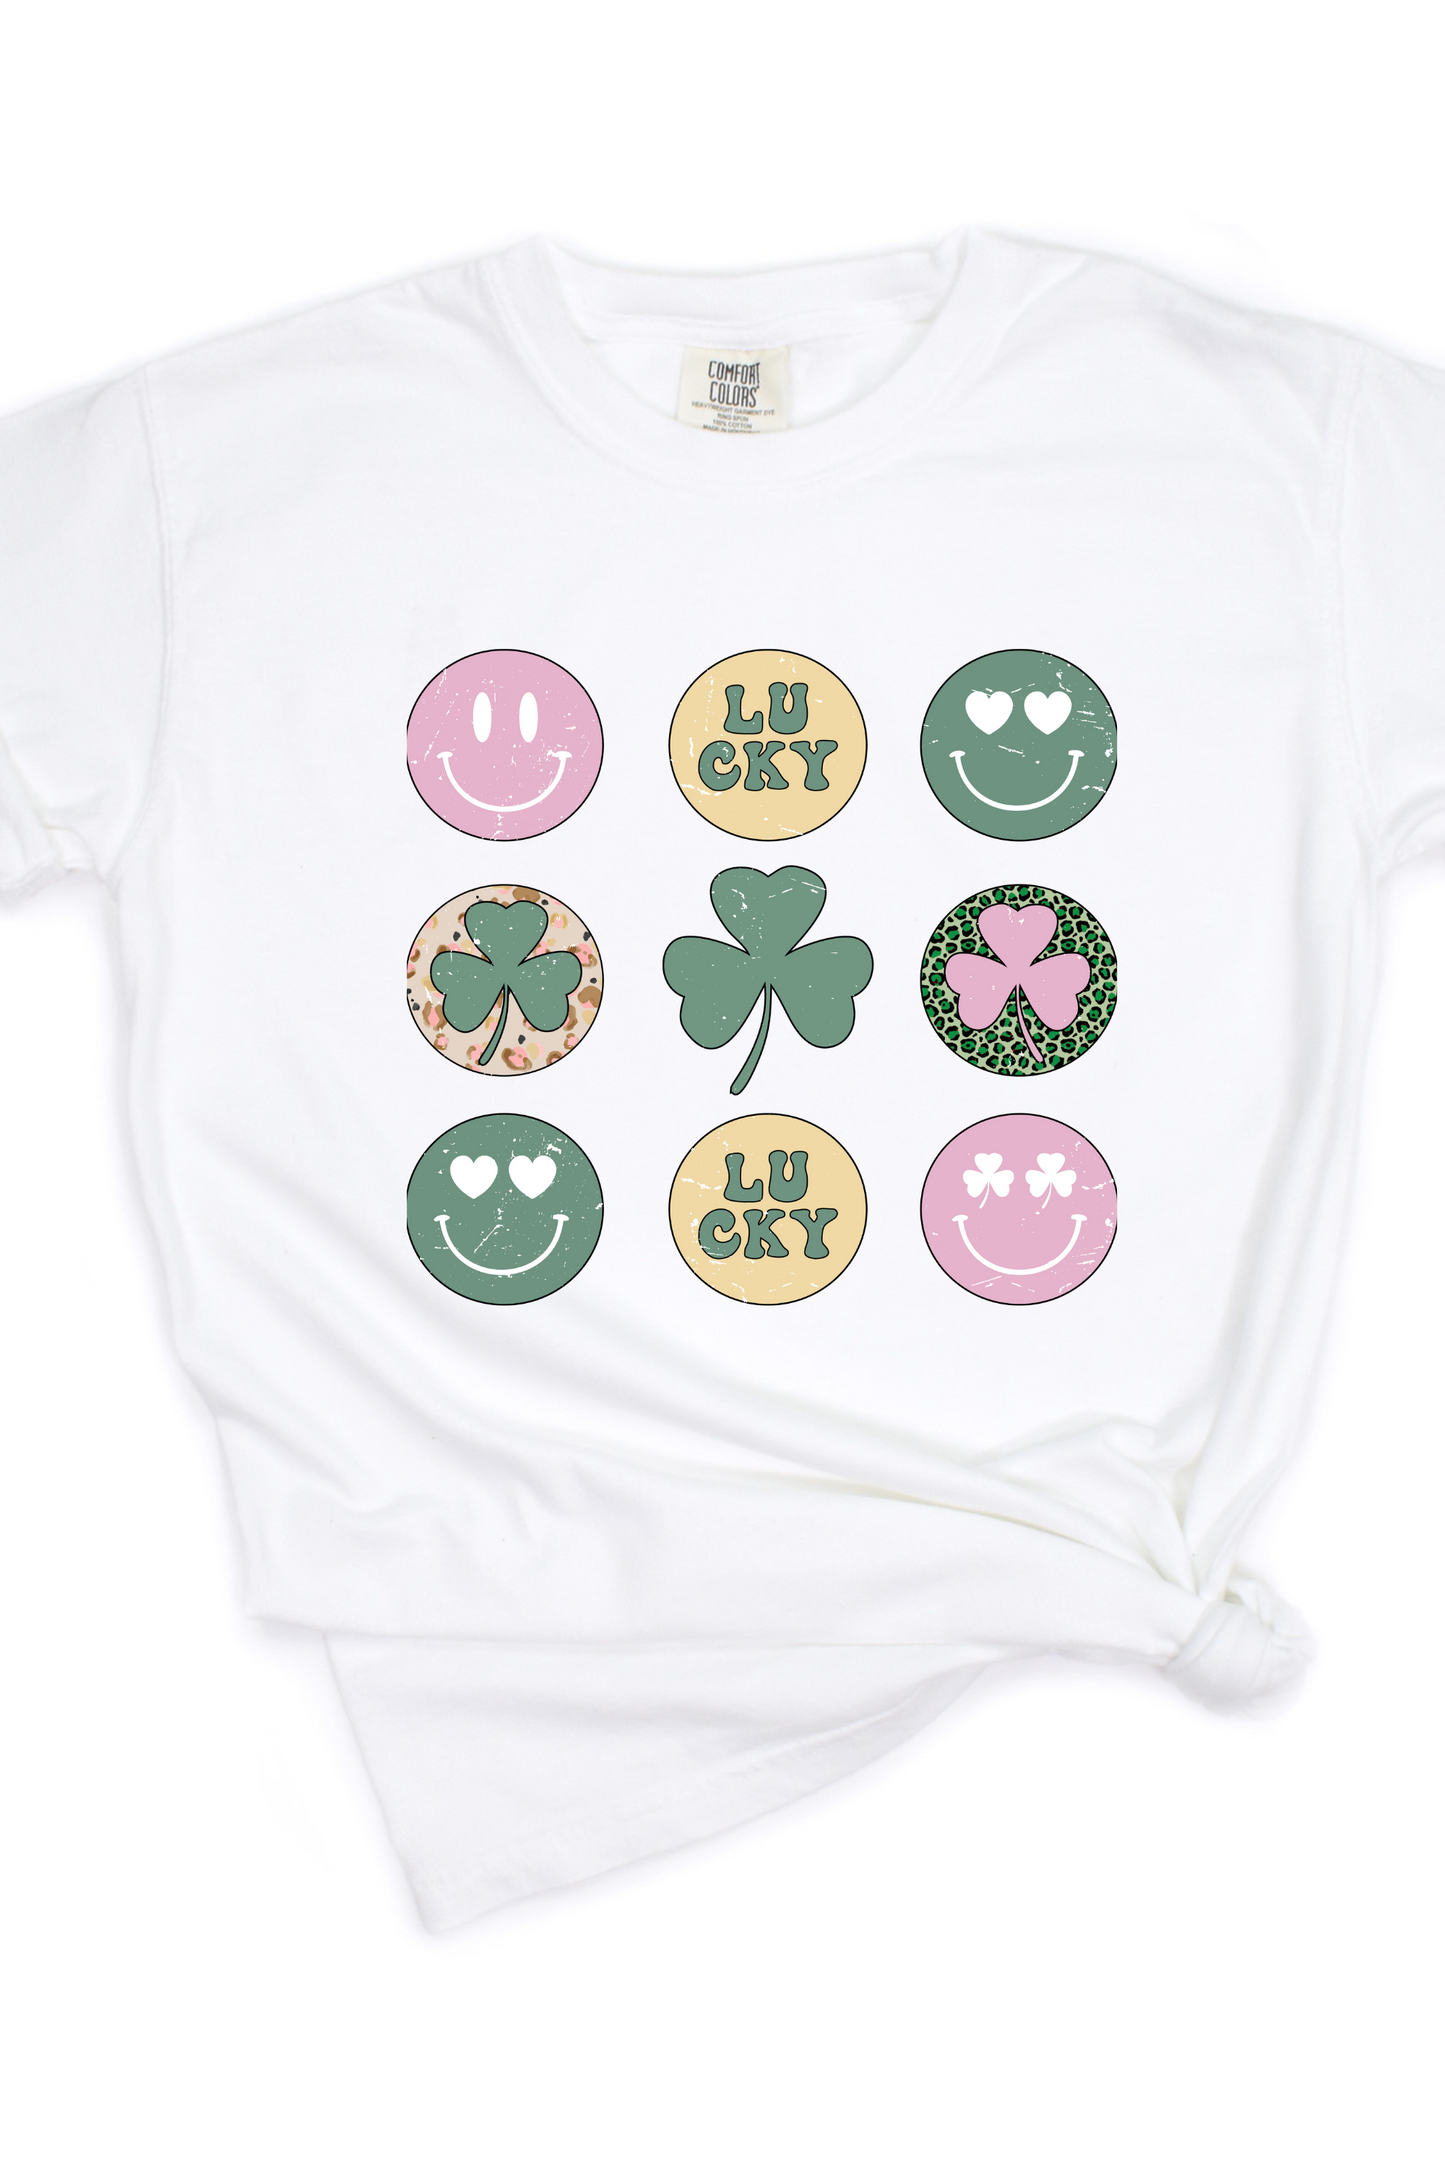 RETRO LUCKY SHAMROCK TEE (COMFORT COLORS) - 3 Colors